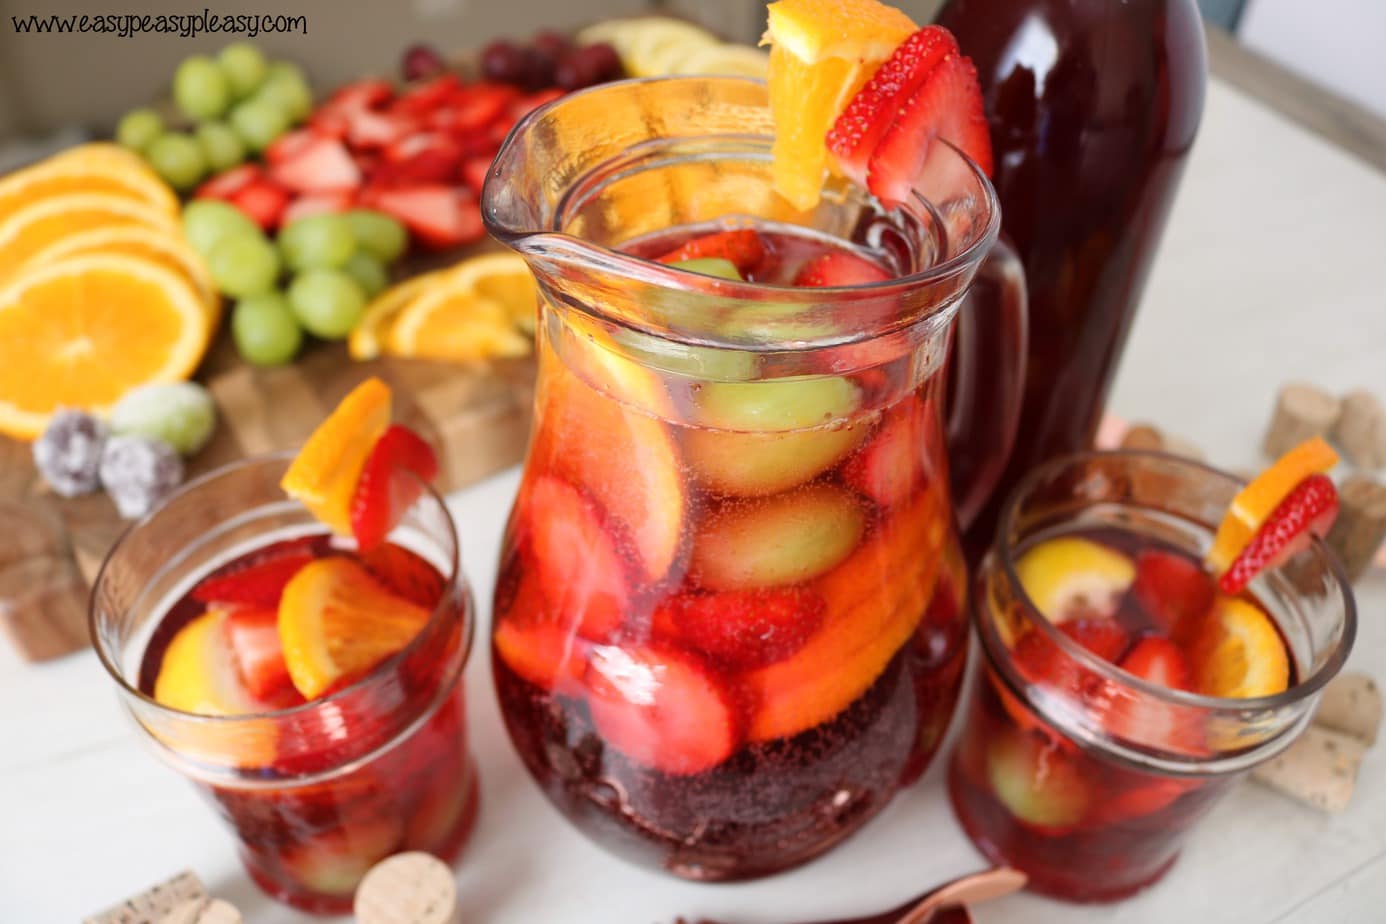 The most delicious fruit infused Sangria that will knock your socks off!